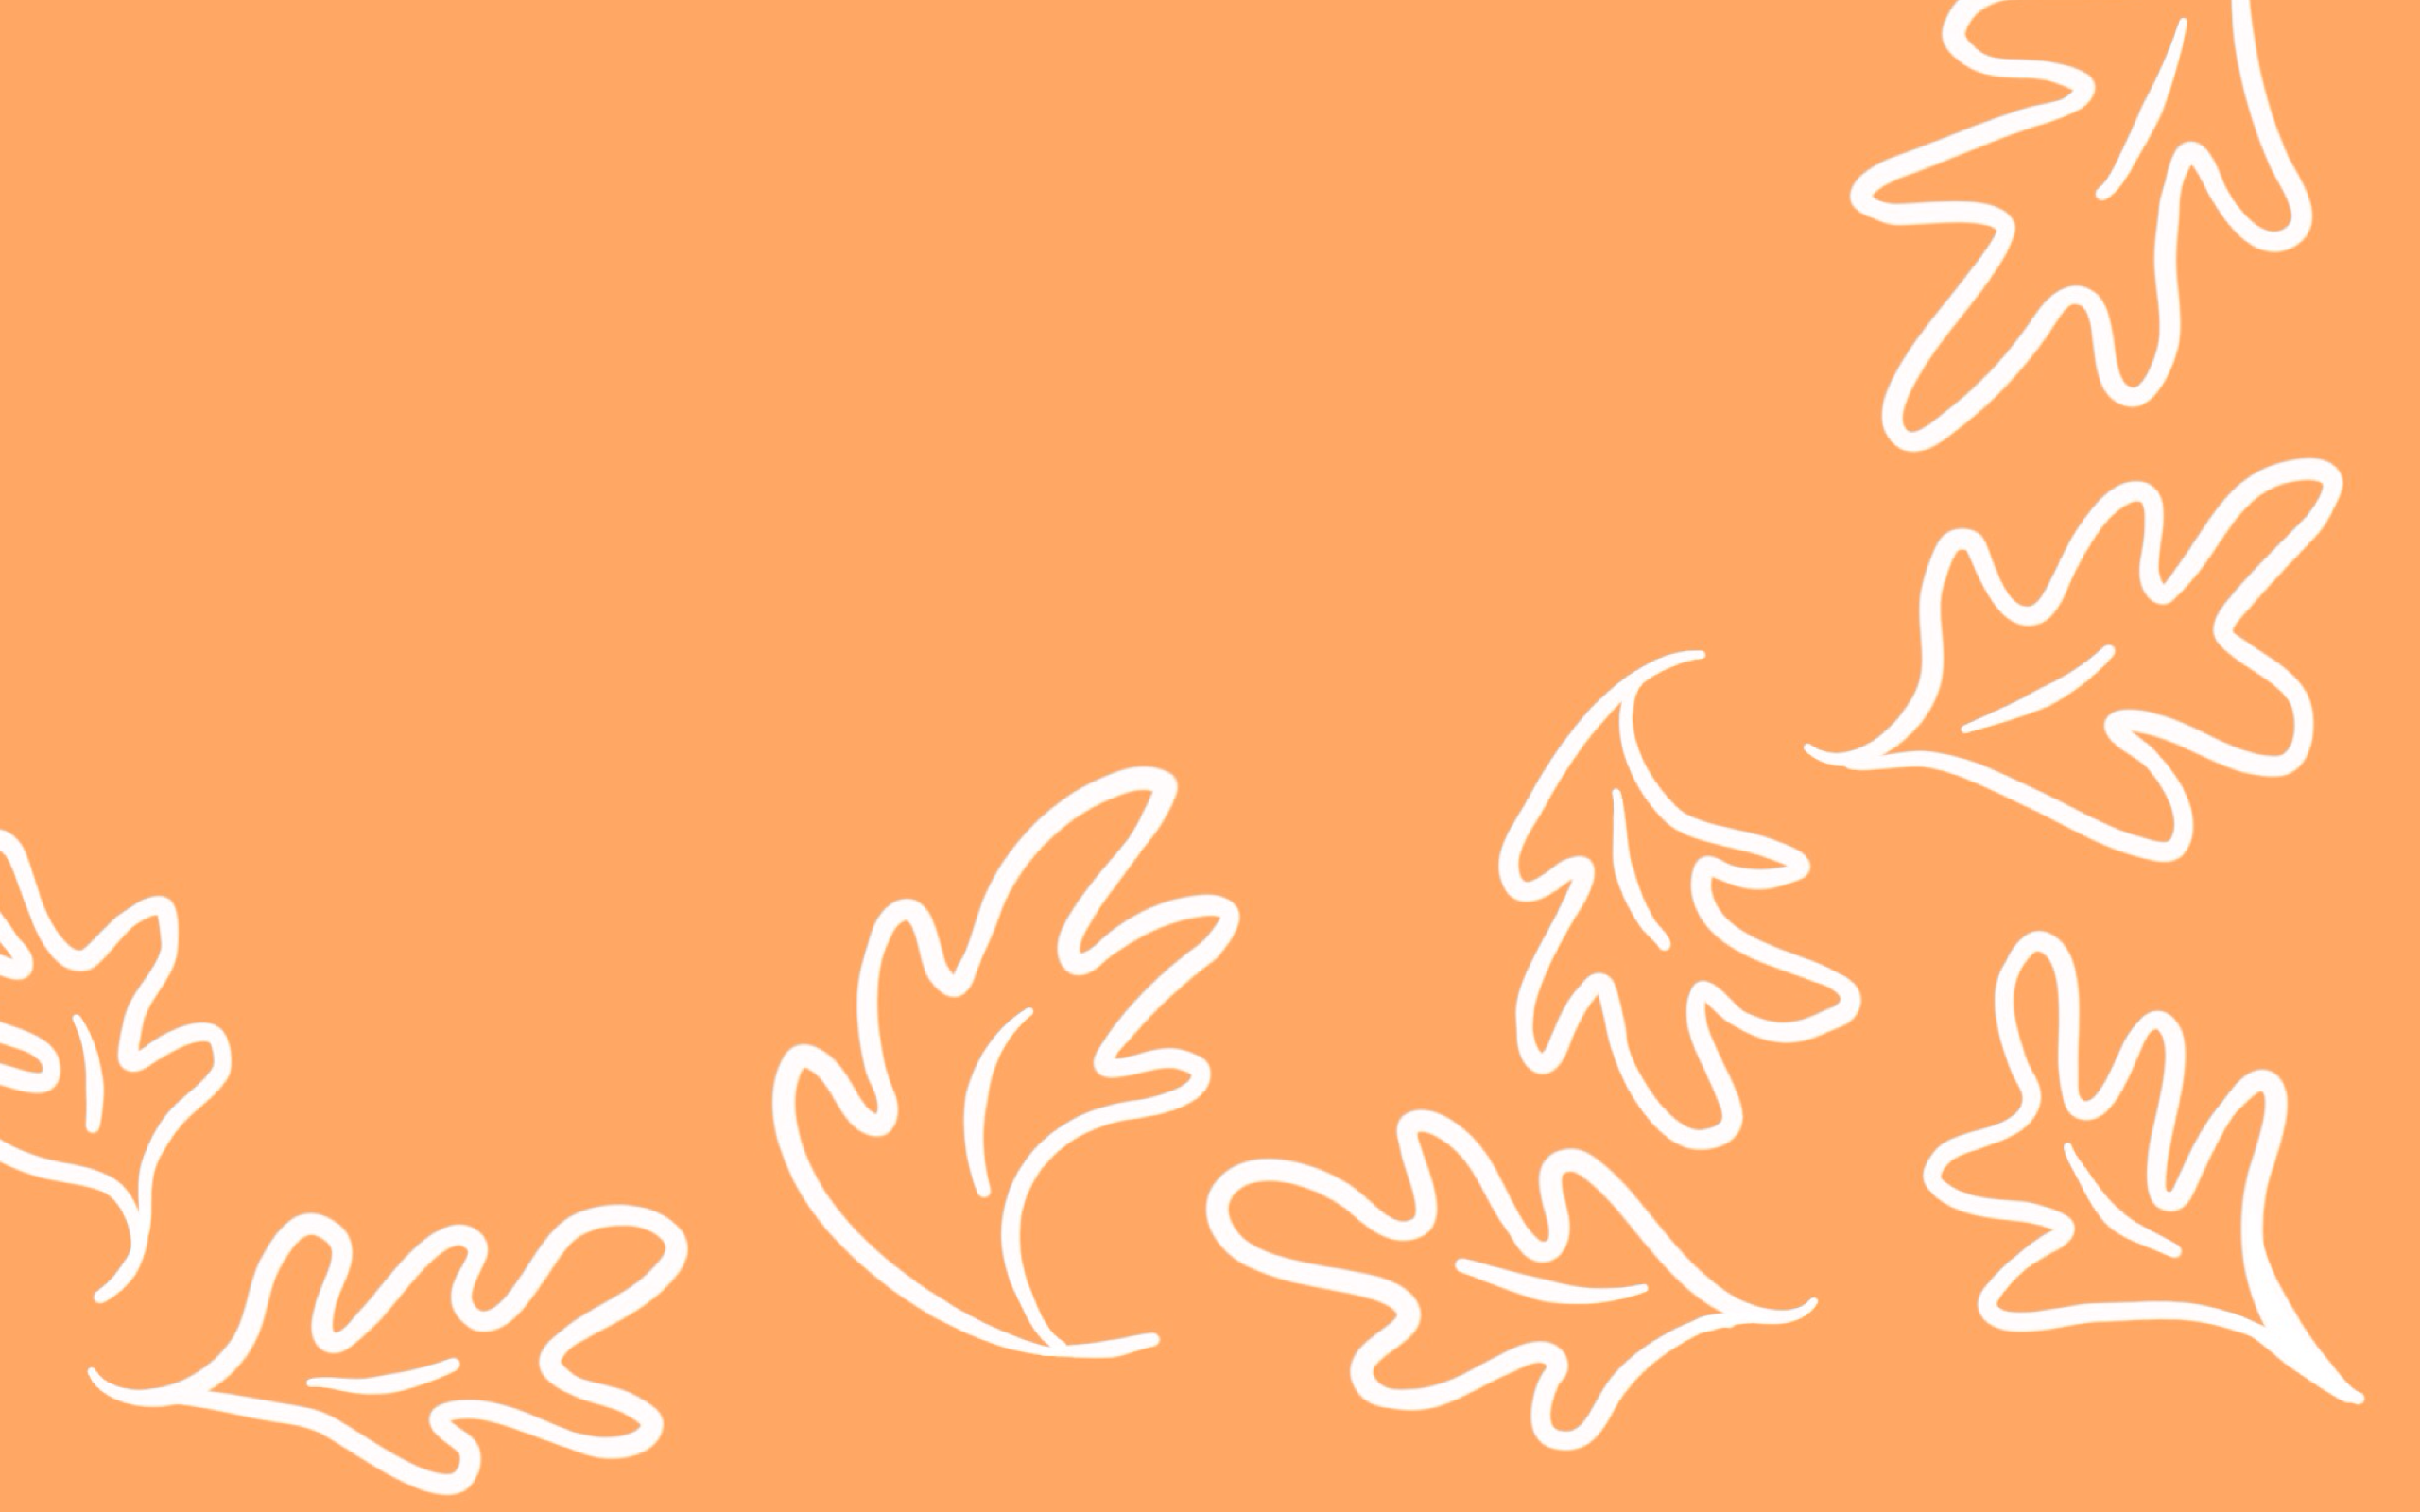 Free Download: Autumn Leaves Wallpaper